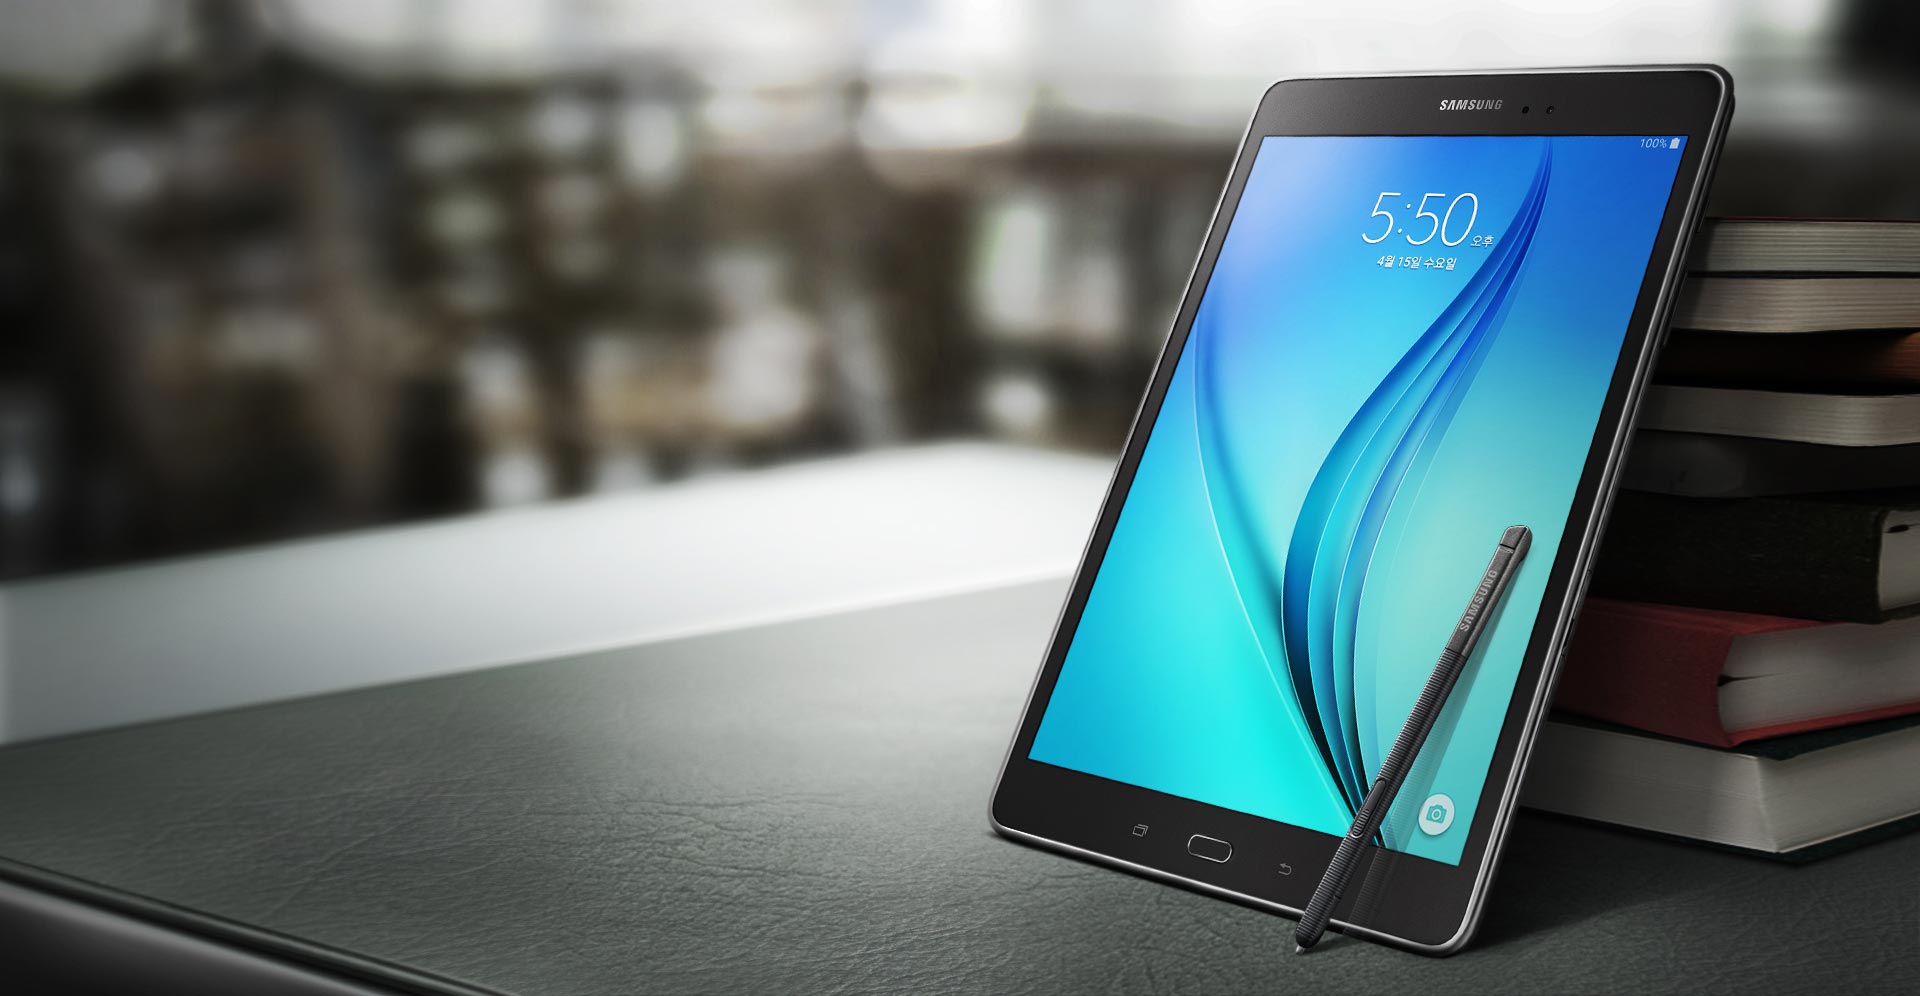 Samsung SMT585 touted to be a midranged 10inch tablet